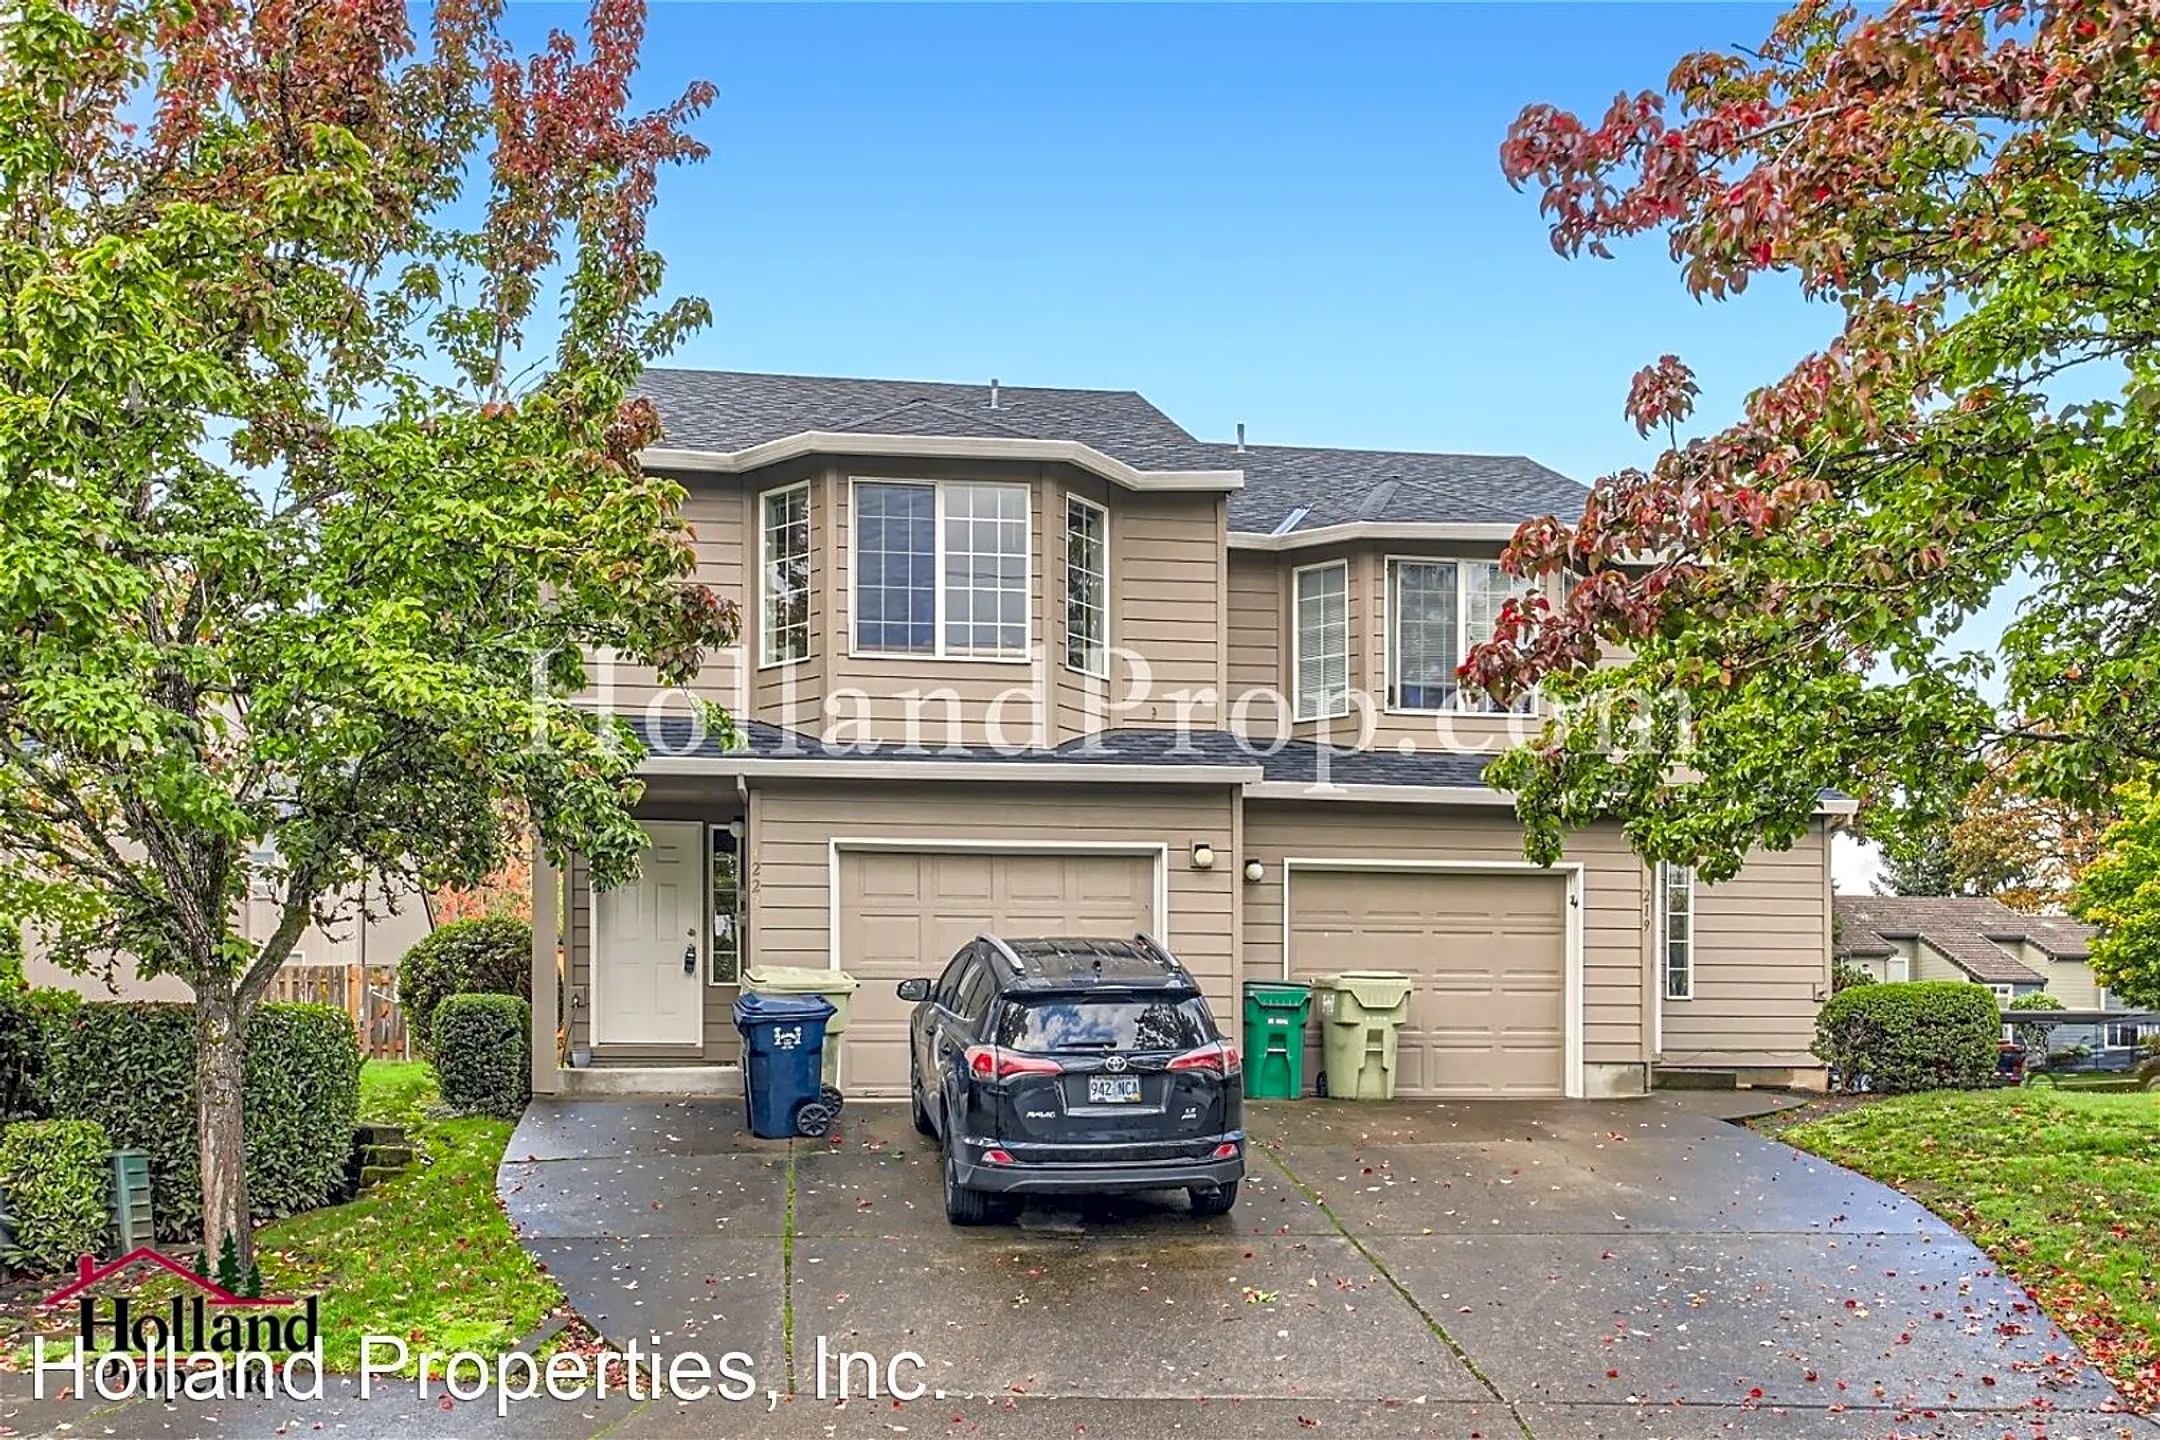 Building - 4223 SW 159th Ave - Beaverton, OR